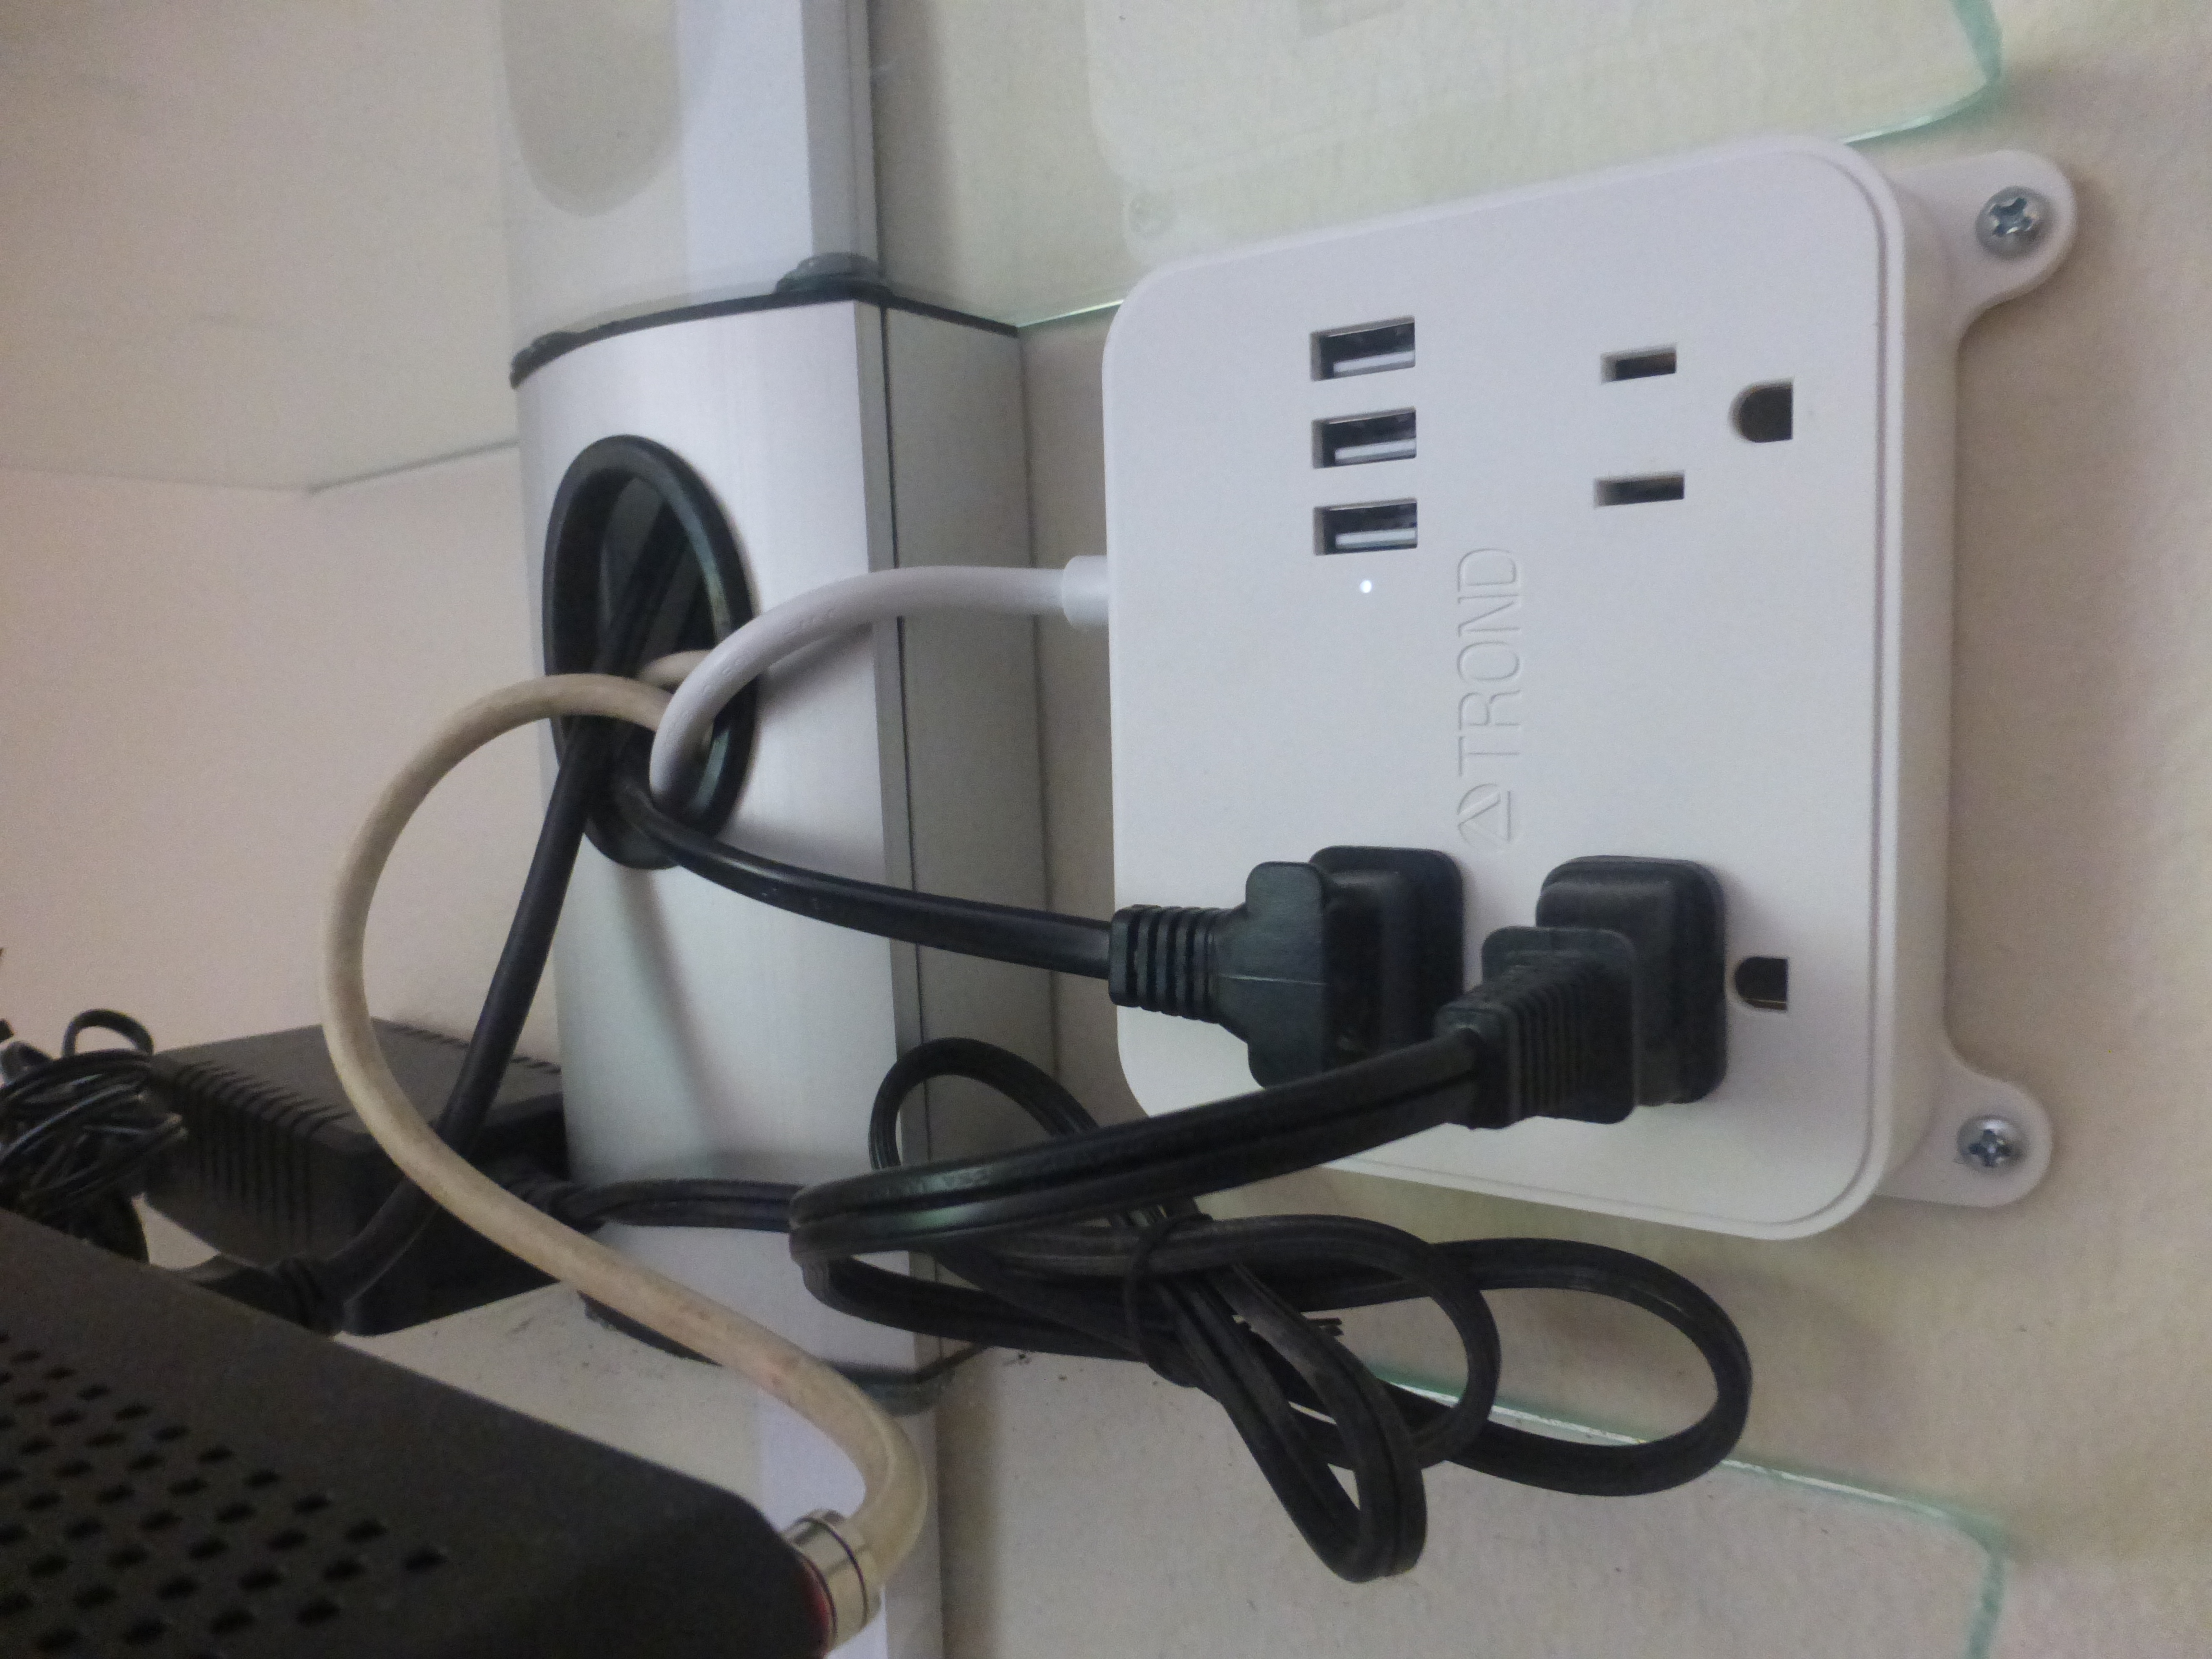 Charging Station showing 3 USB Ports